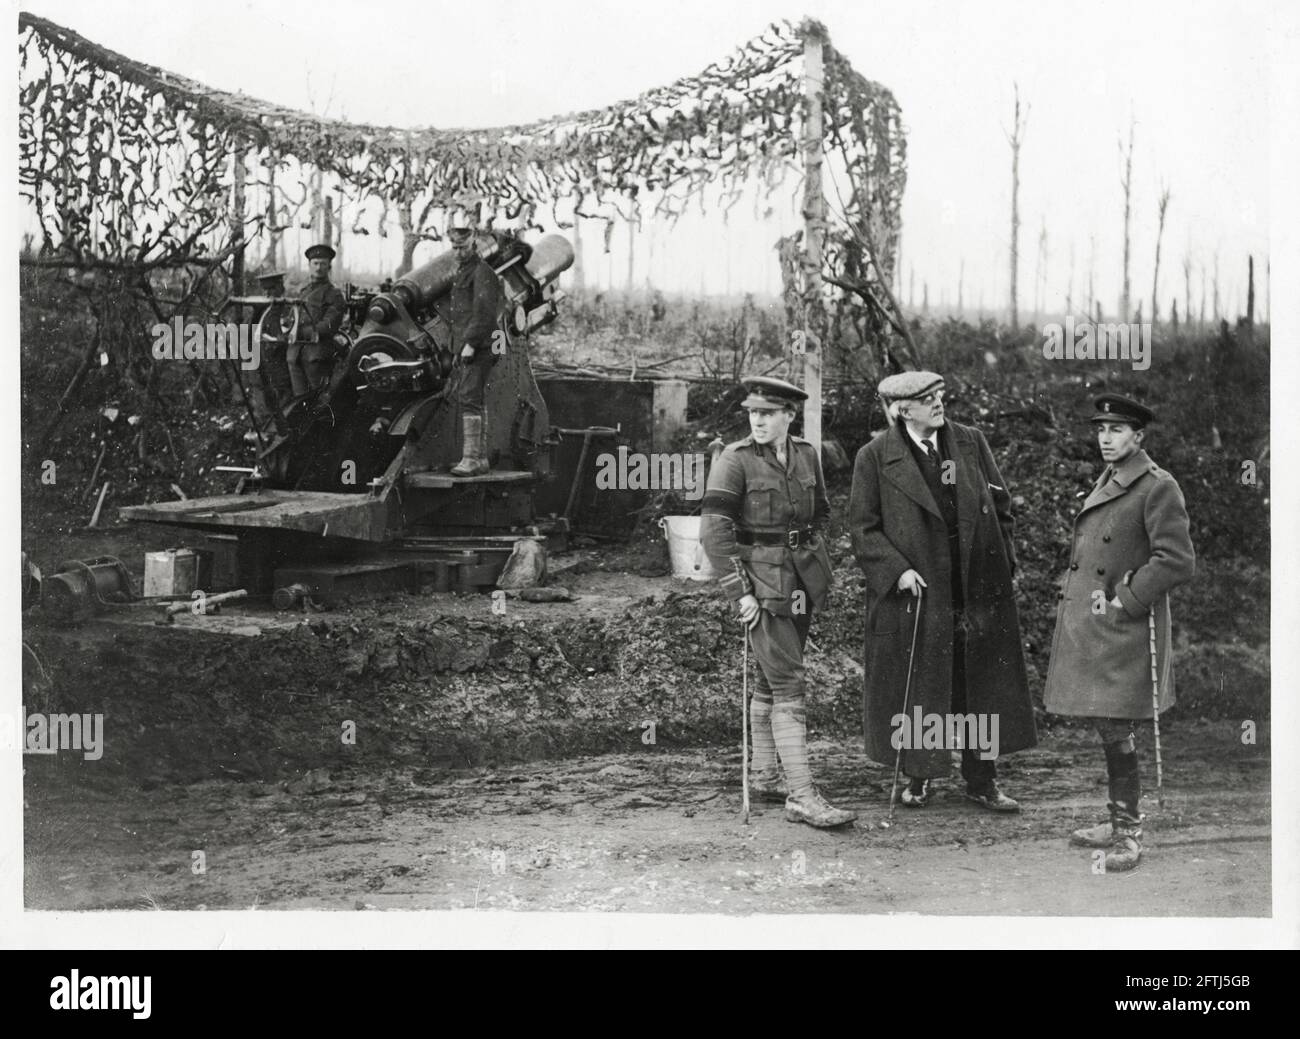 World War One, WWI, Western Front - Arthur Balfour, Foreign Secretary 1916-1919 at a howitzer during hs visit in Autumn 1916, France Stock Photo